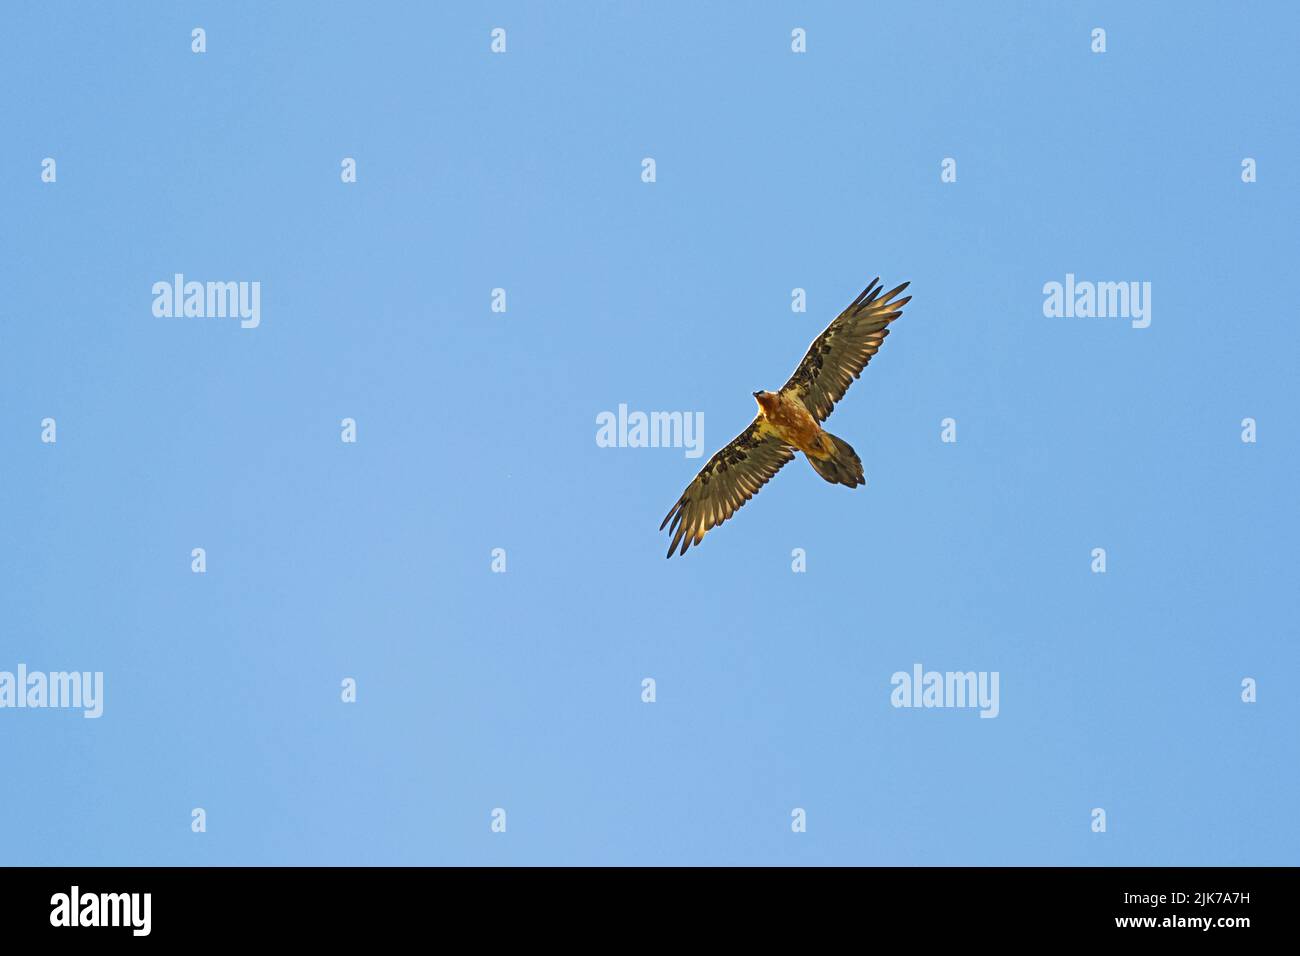 An adult Bearded Vultures or Lammergeier (Gypaetus barbatus) circeling at the blue sky above the photographer Stock Photo